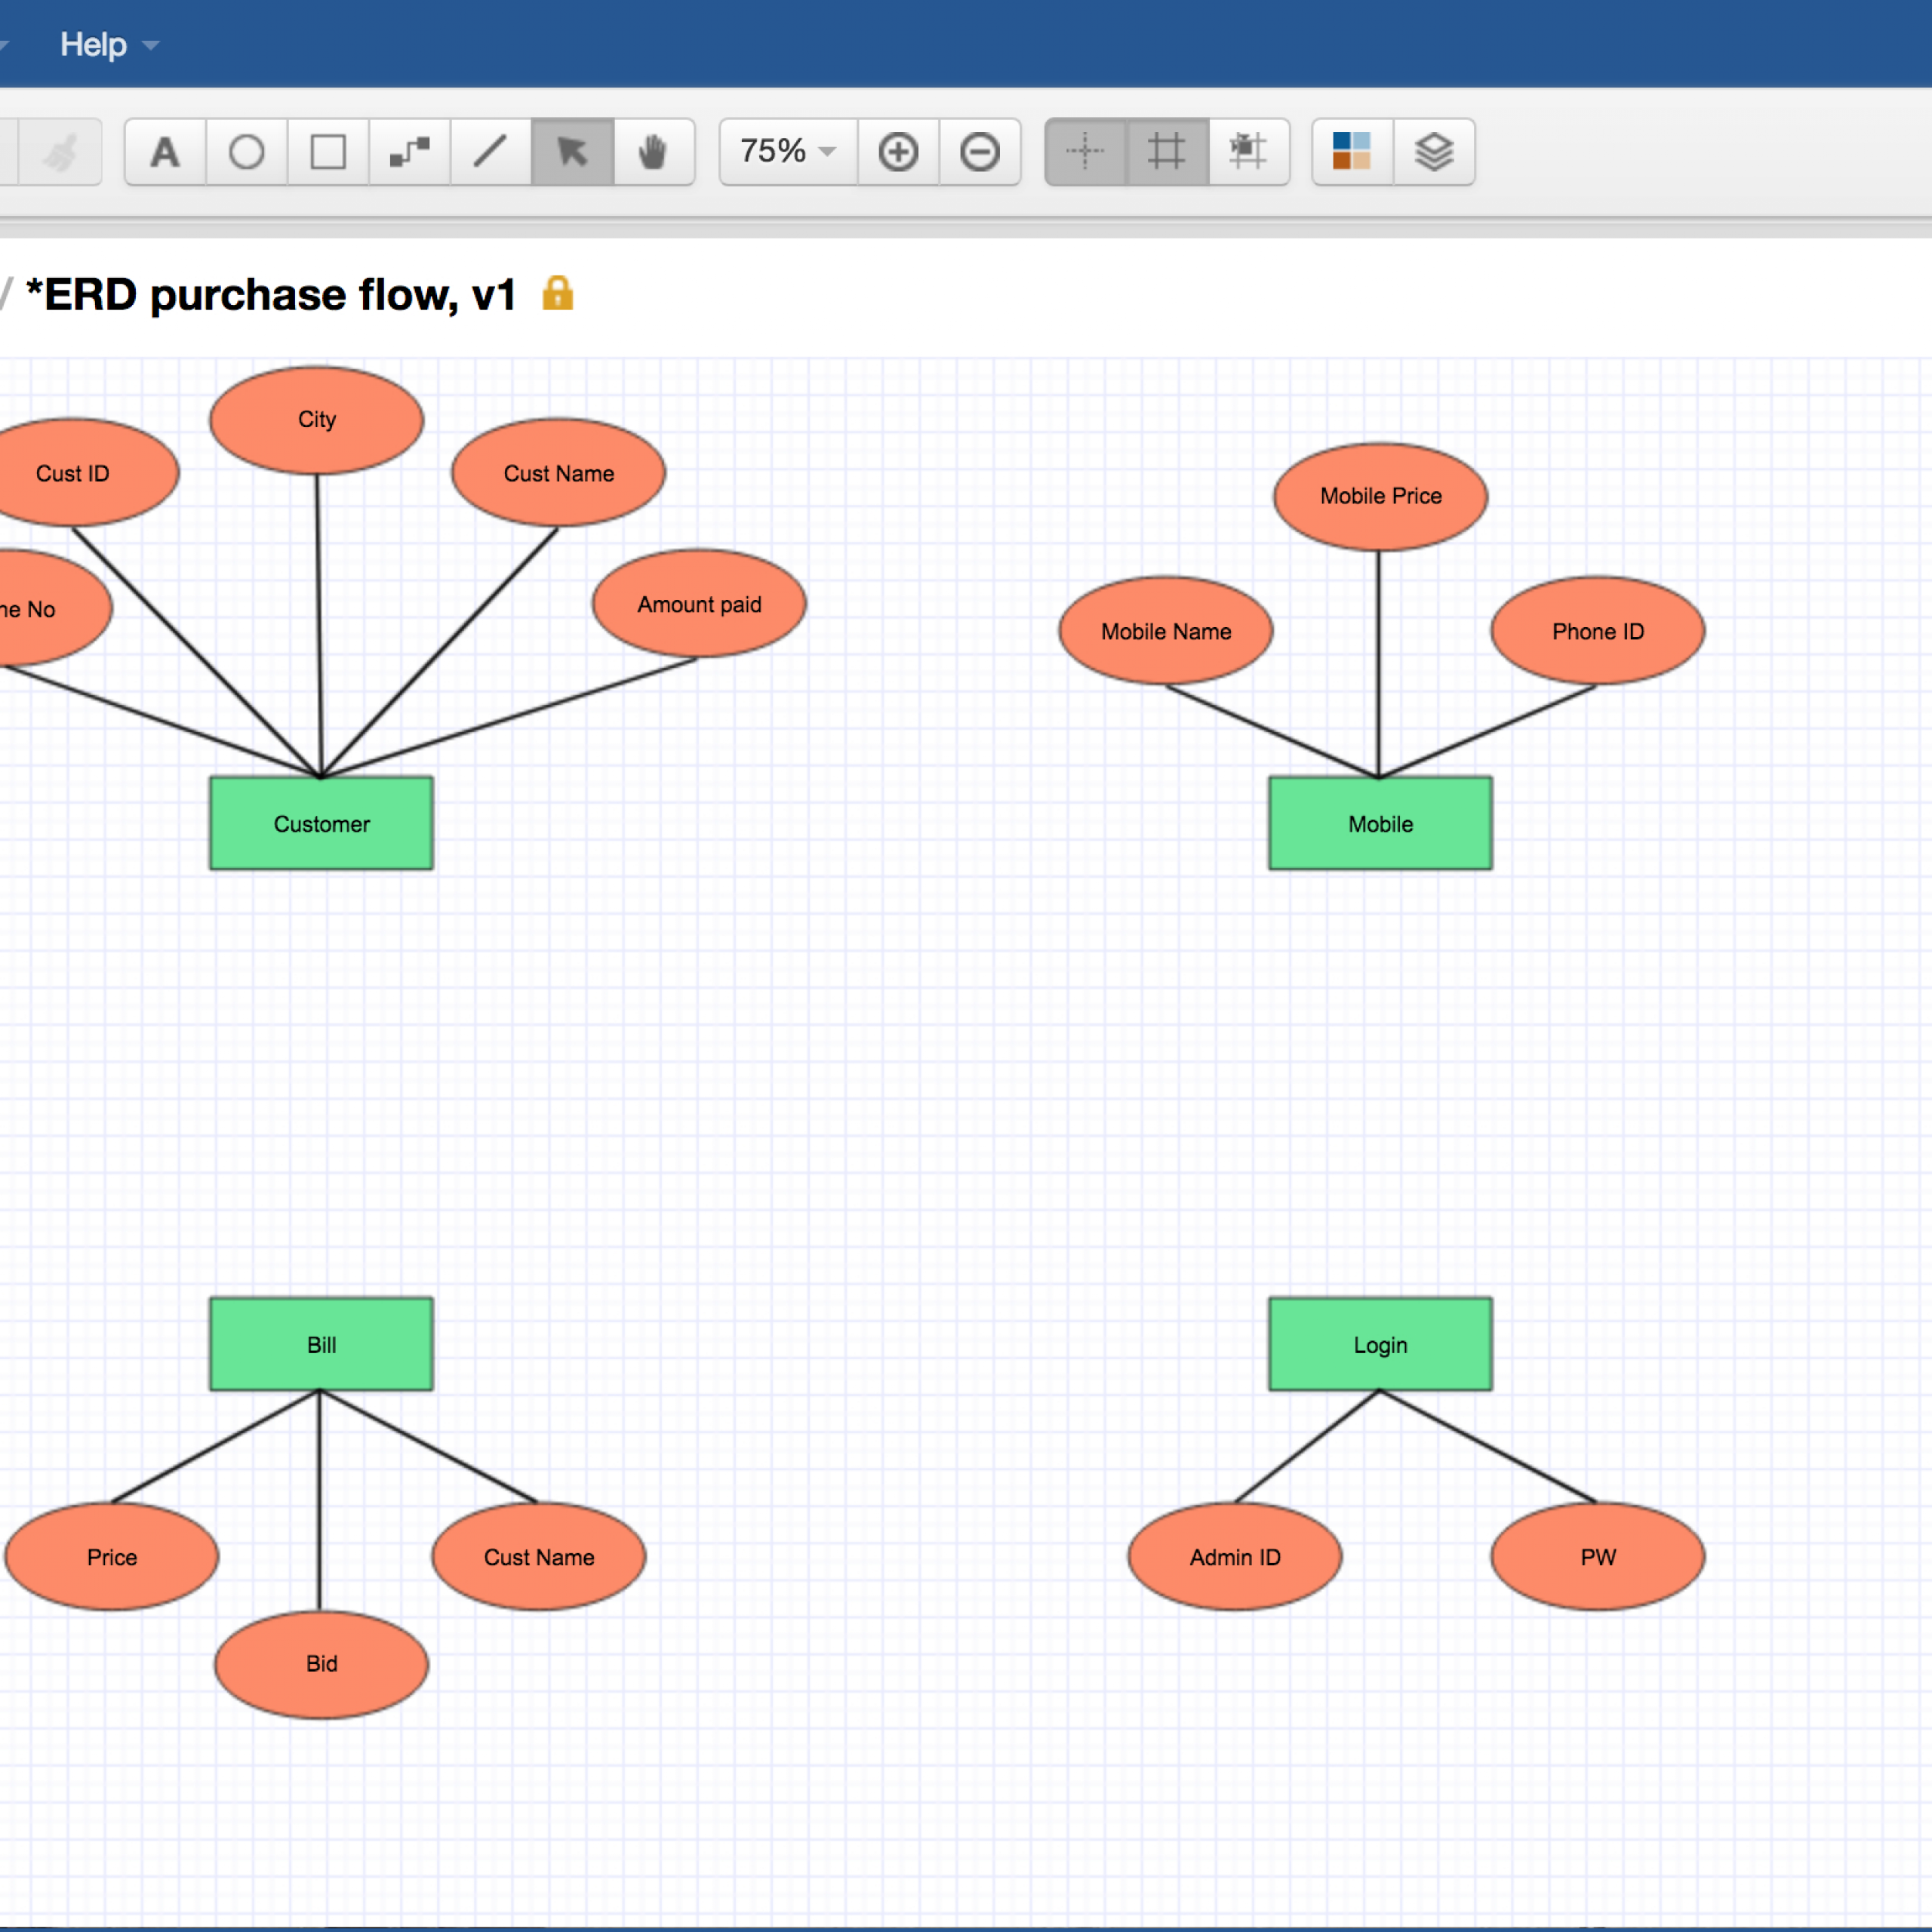 How To Draw An Entity-Relationship Diagram with How To Make Er Diagram